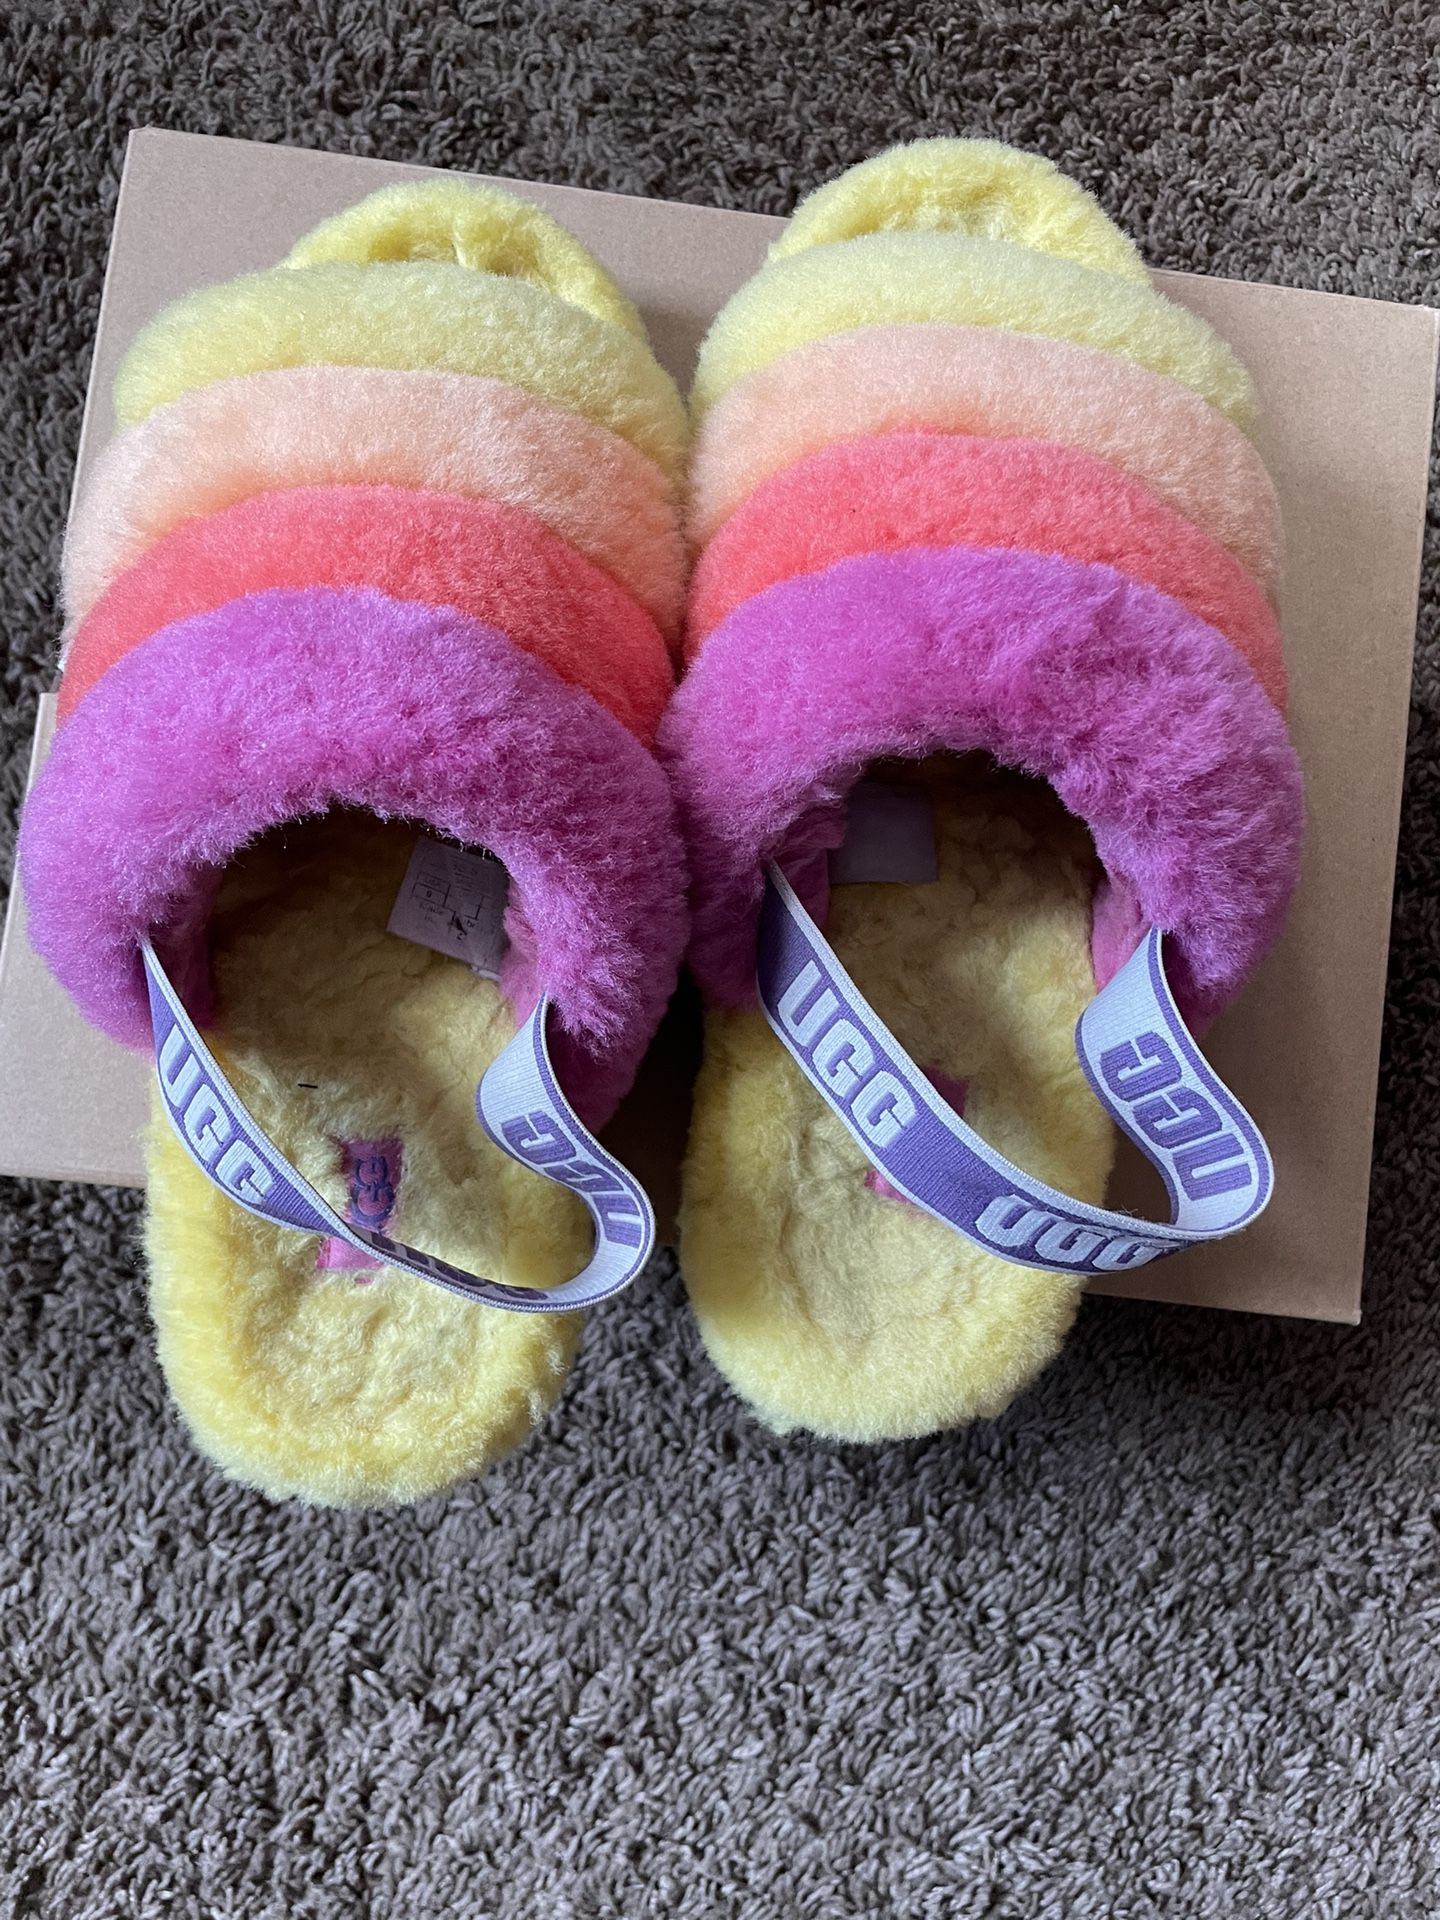 Comfy Slippers